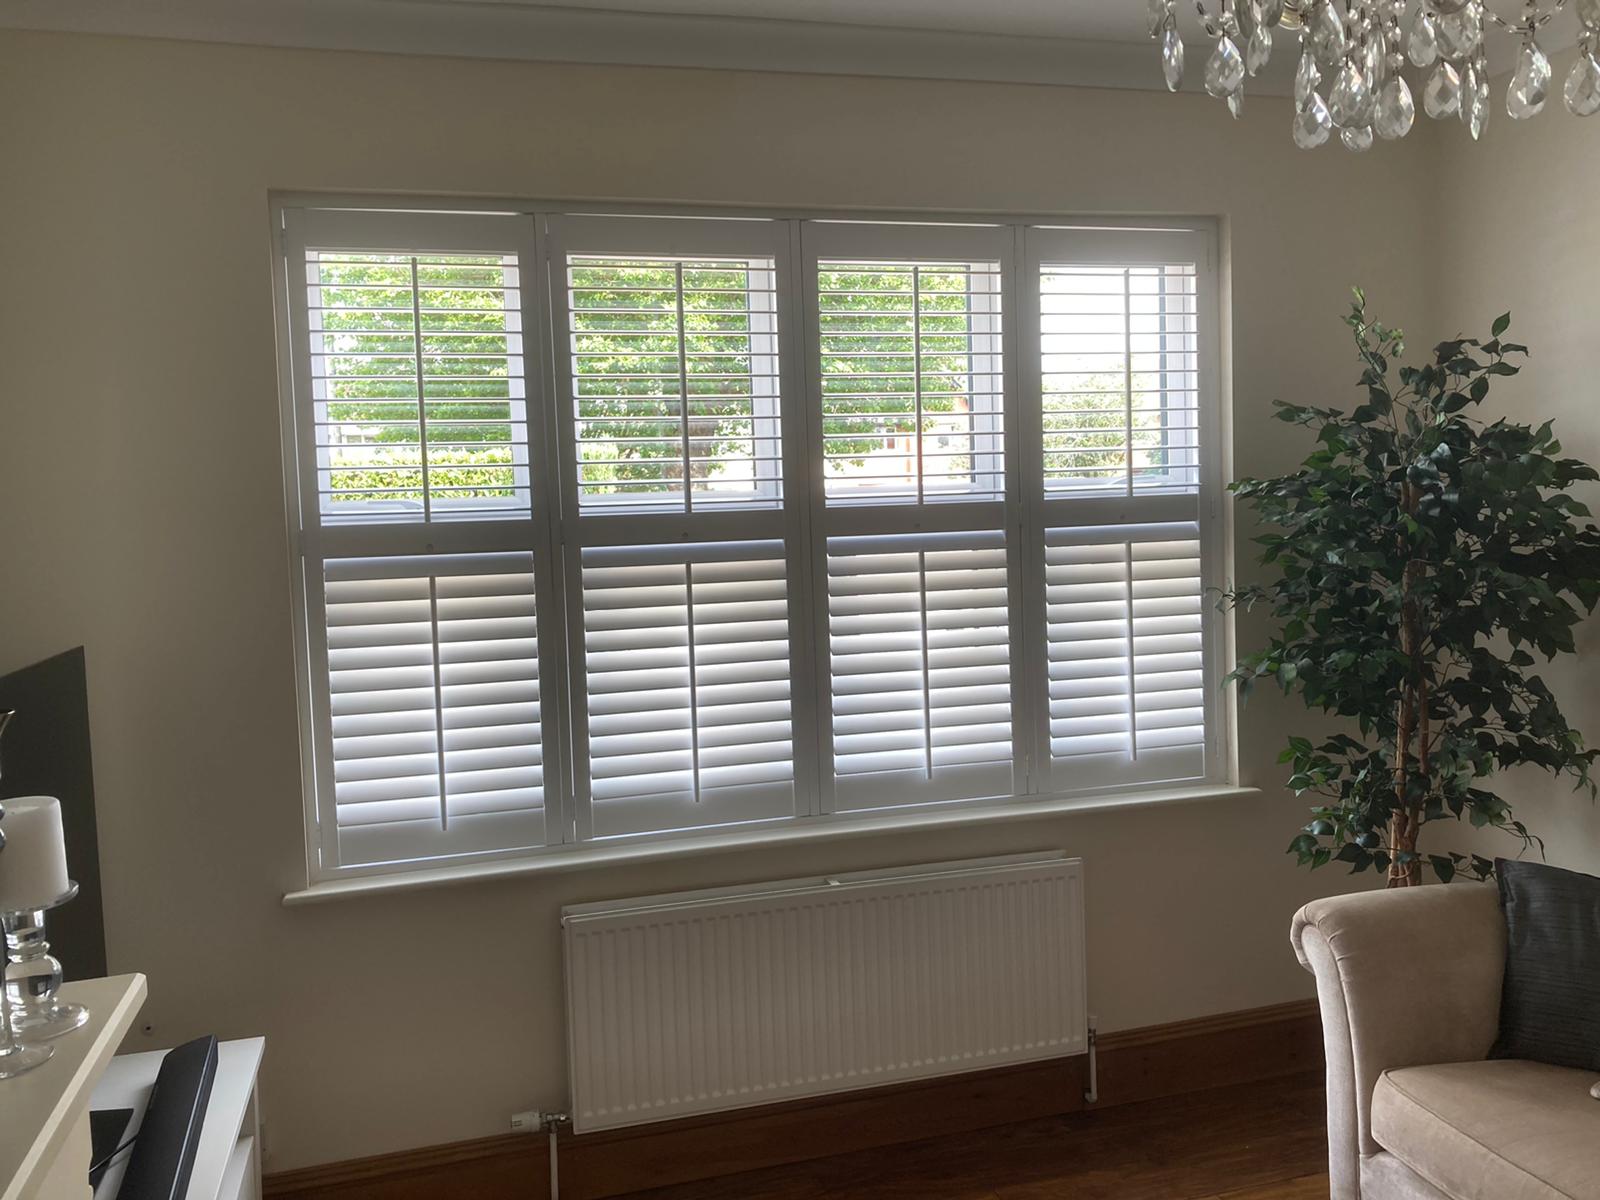 Home Office Shutters for sound insulation and privacy